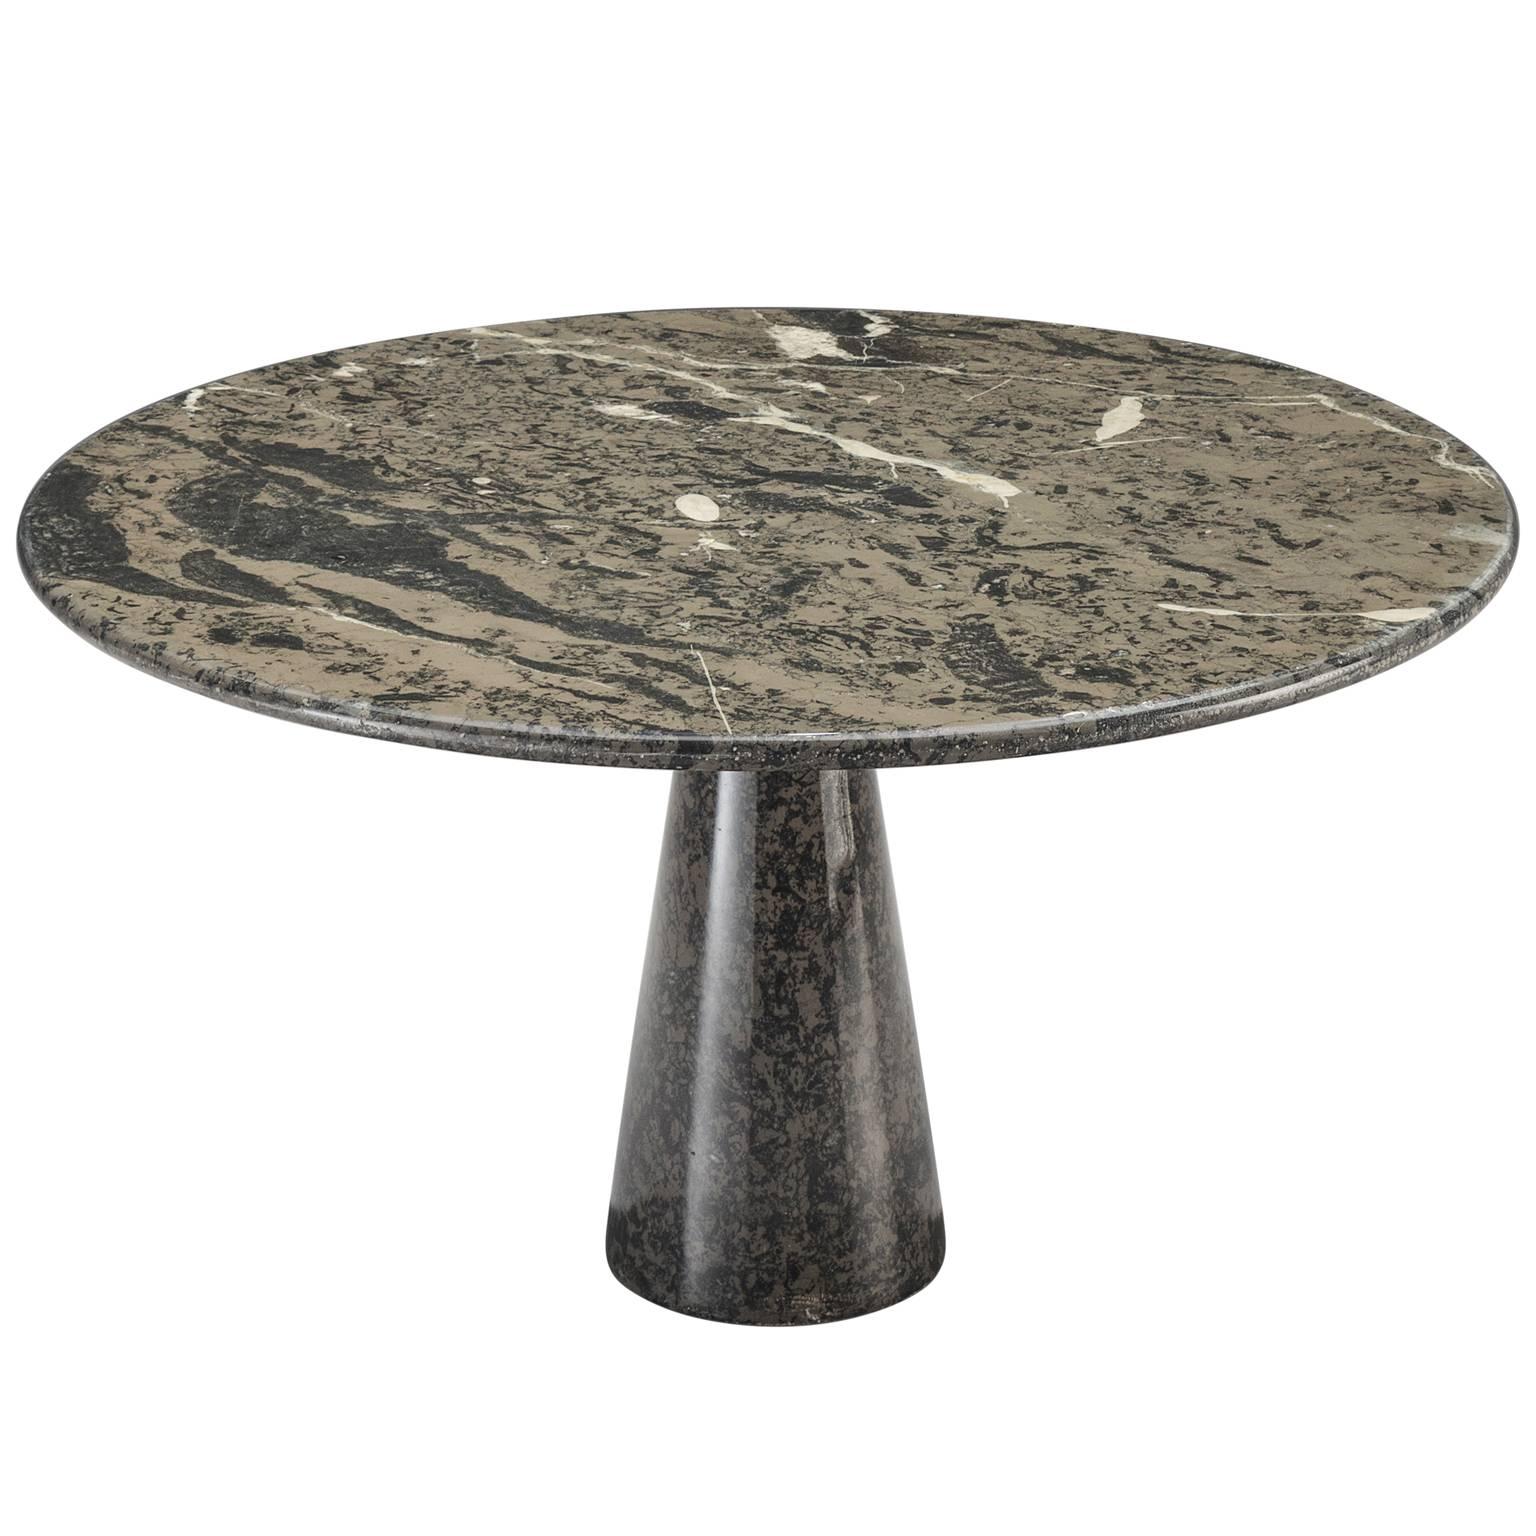 Italian Black and Grey Marble Centre Table